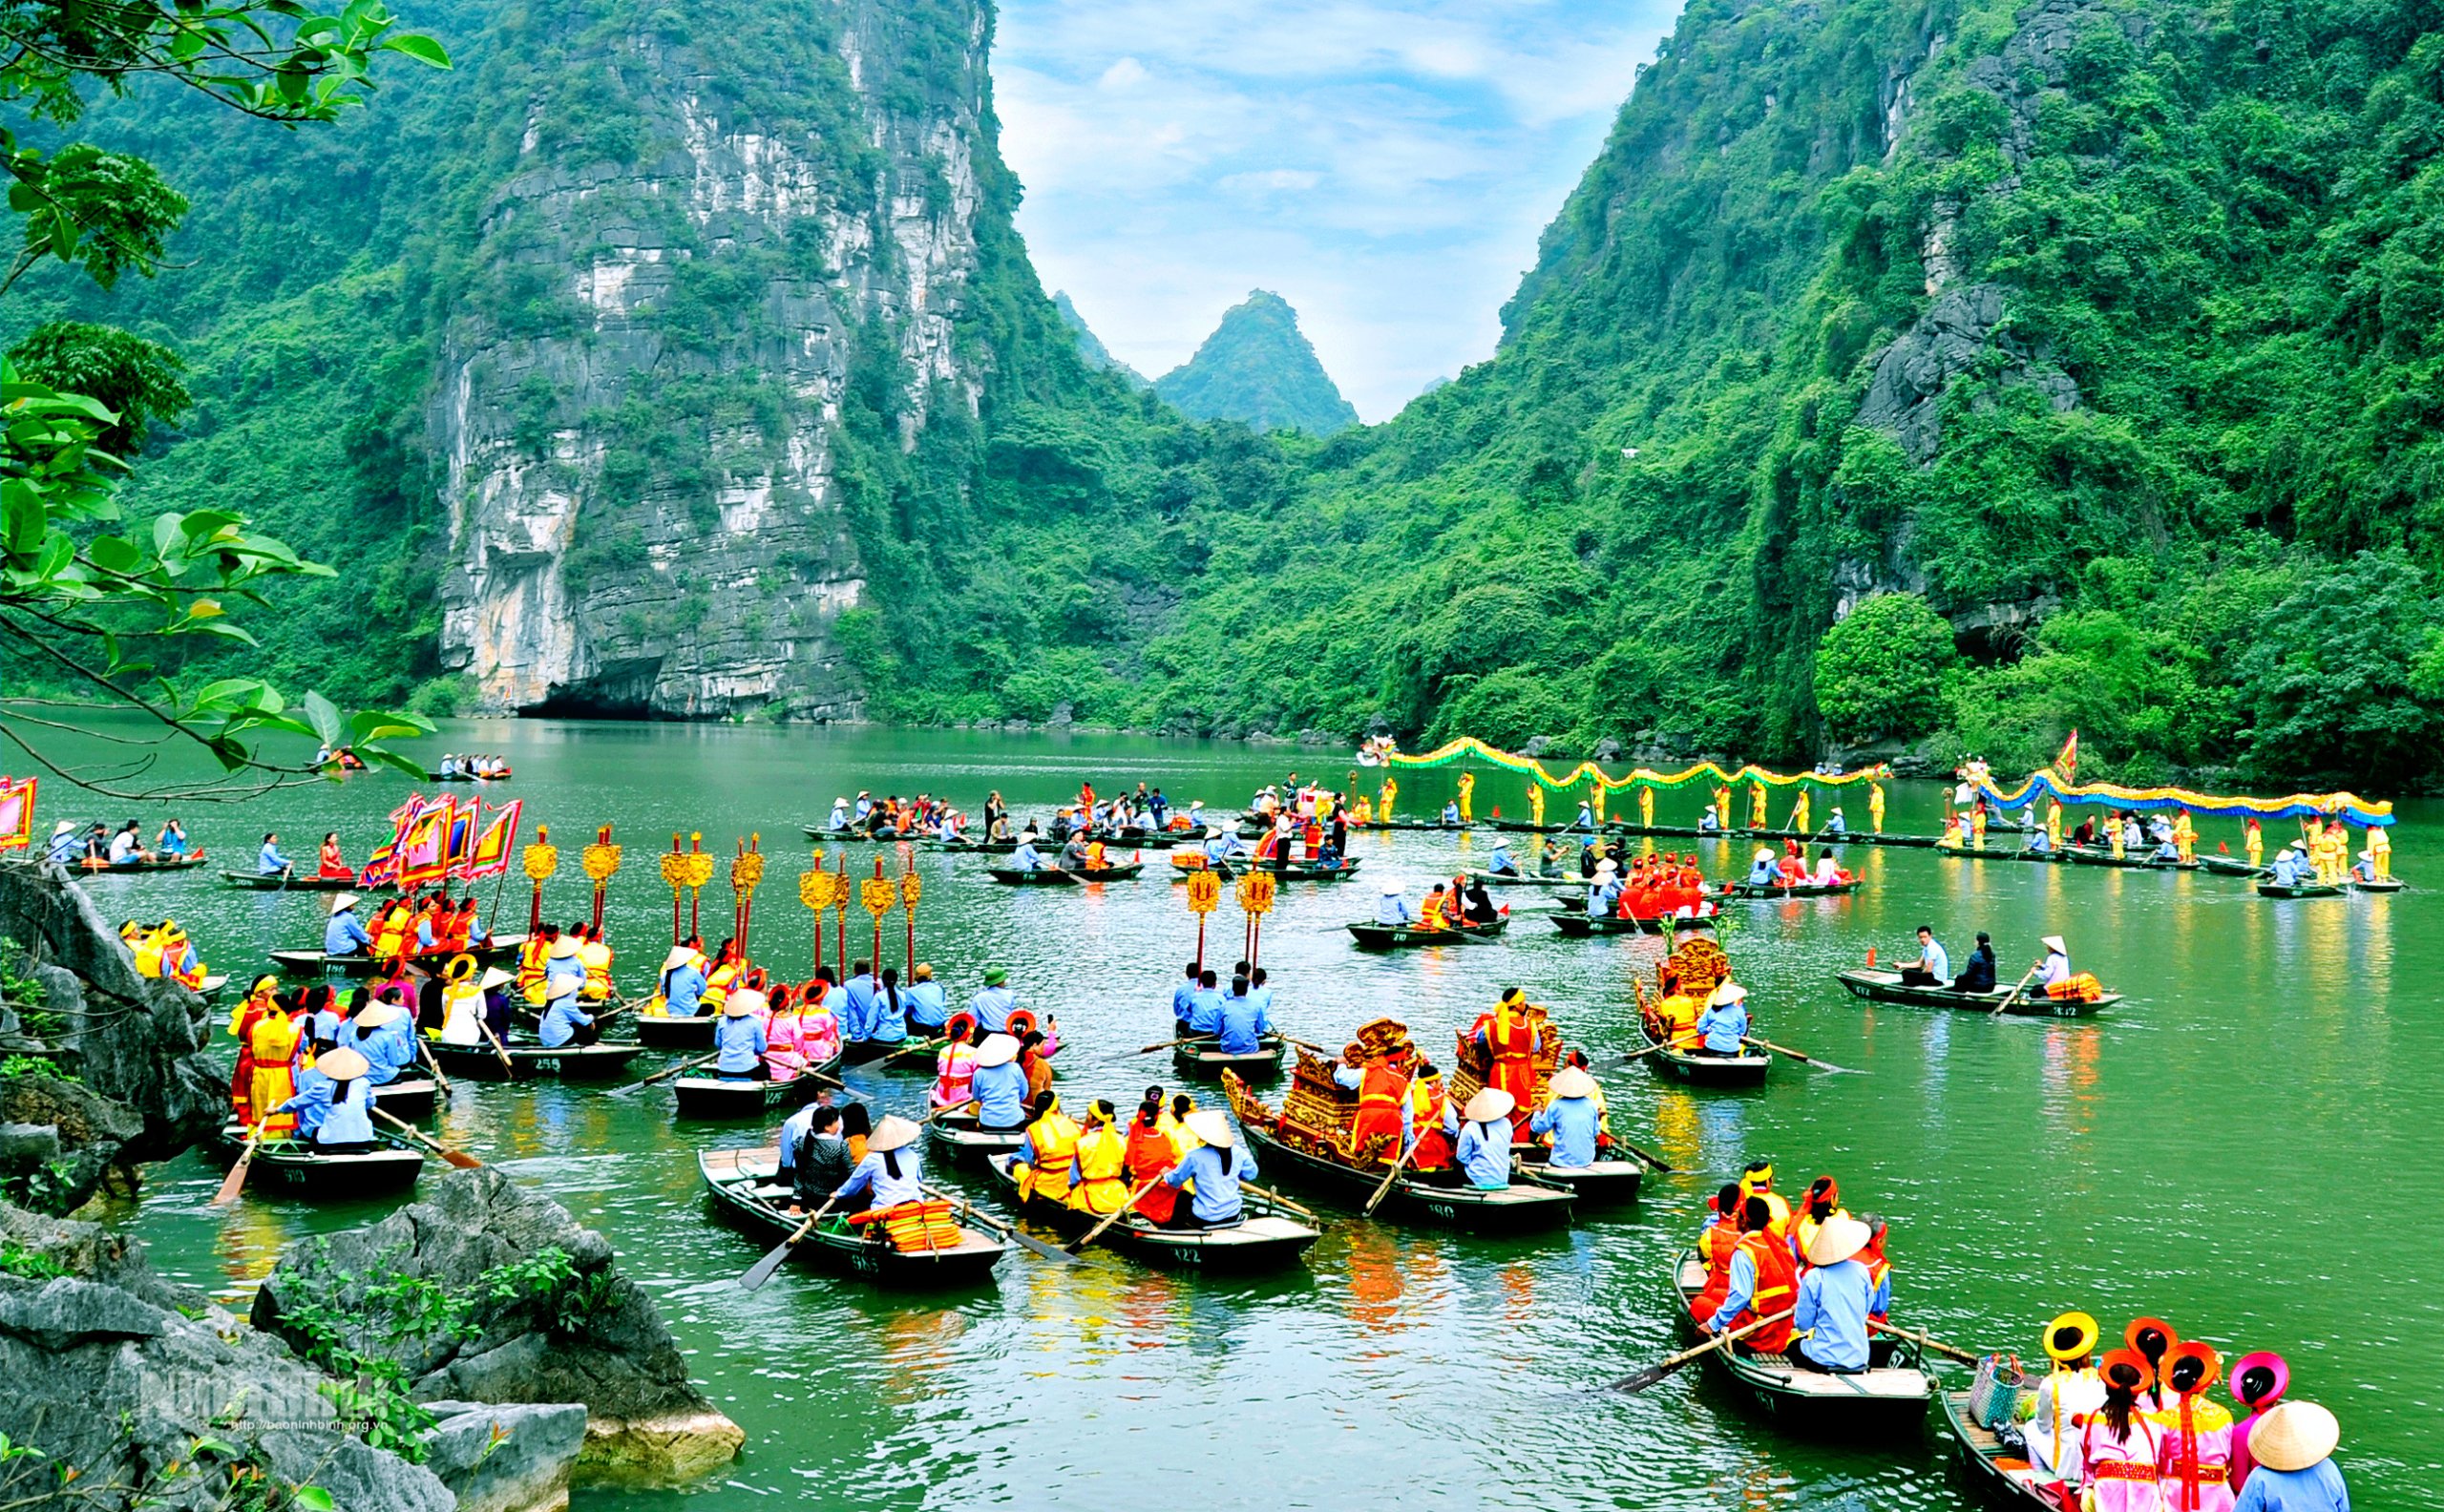 The best time for tours in Trang An is from February to June, as this is when many traditional festivals take place